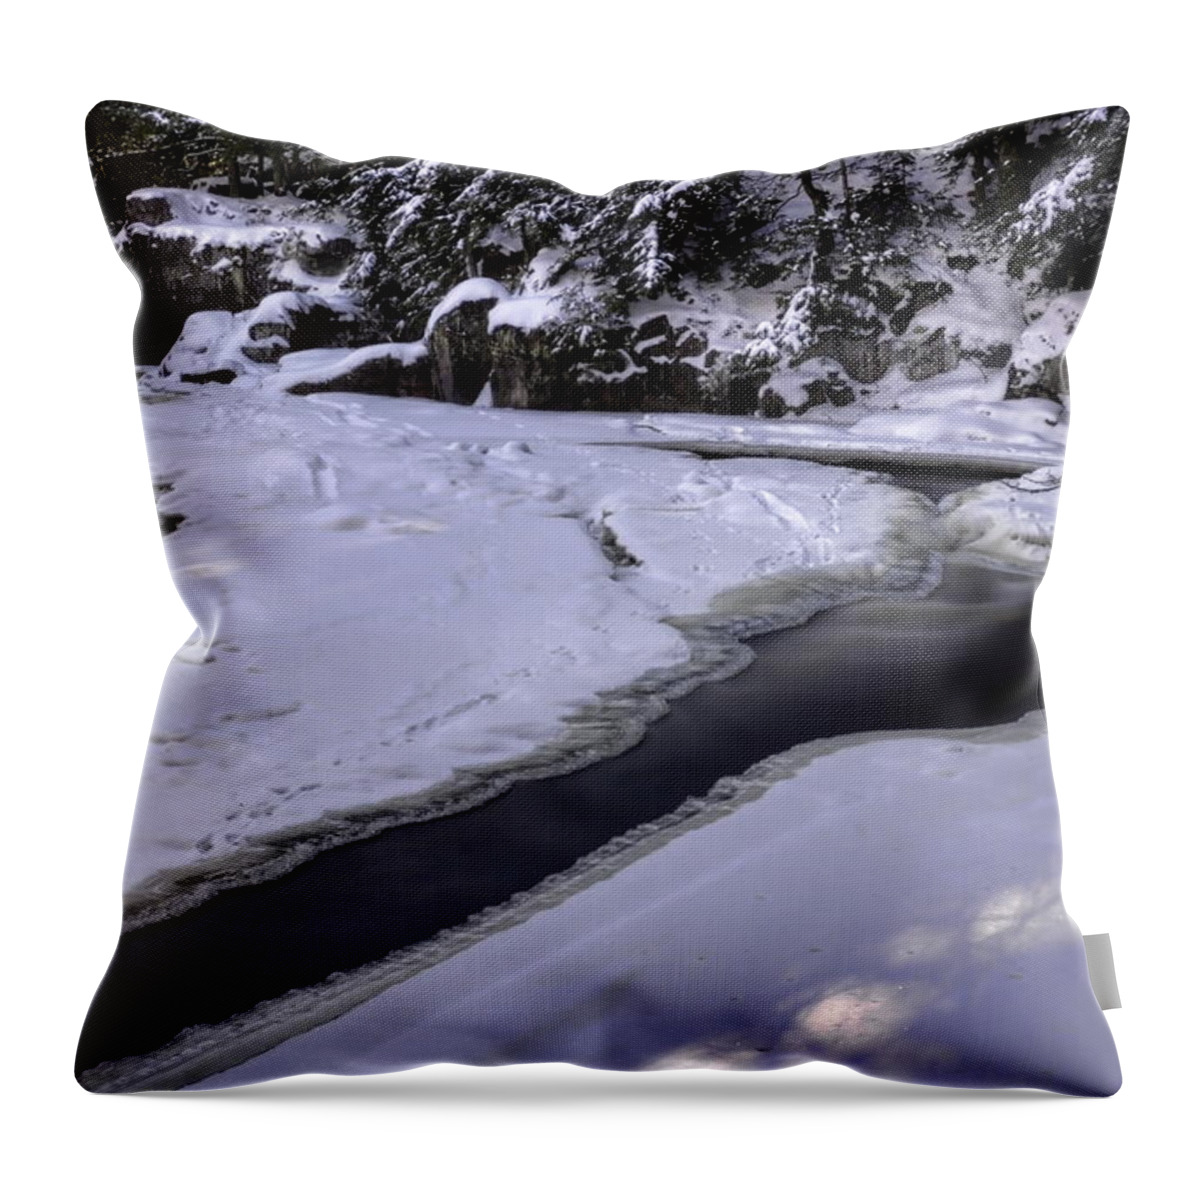 Eau Claire Dells Throw Pillow featuring the photograph The Long Slide by Dale Kauzlaric